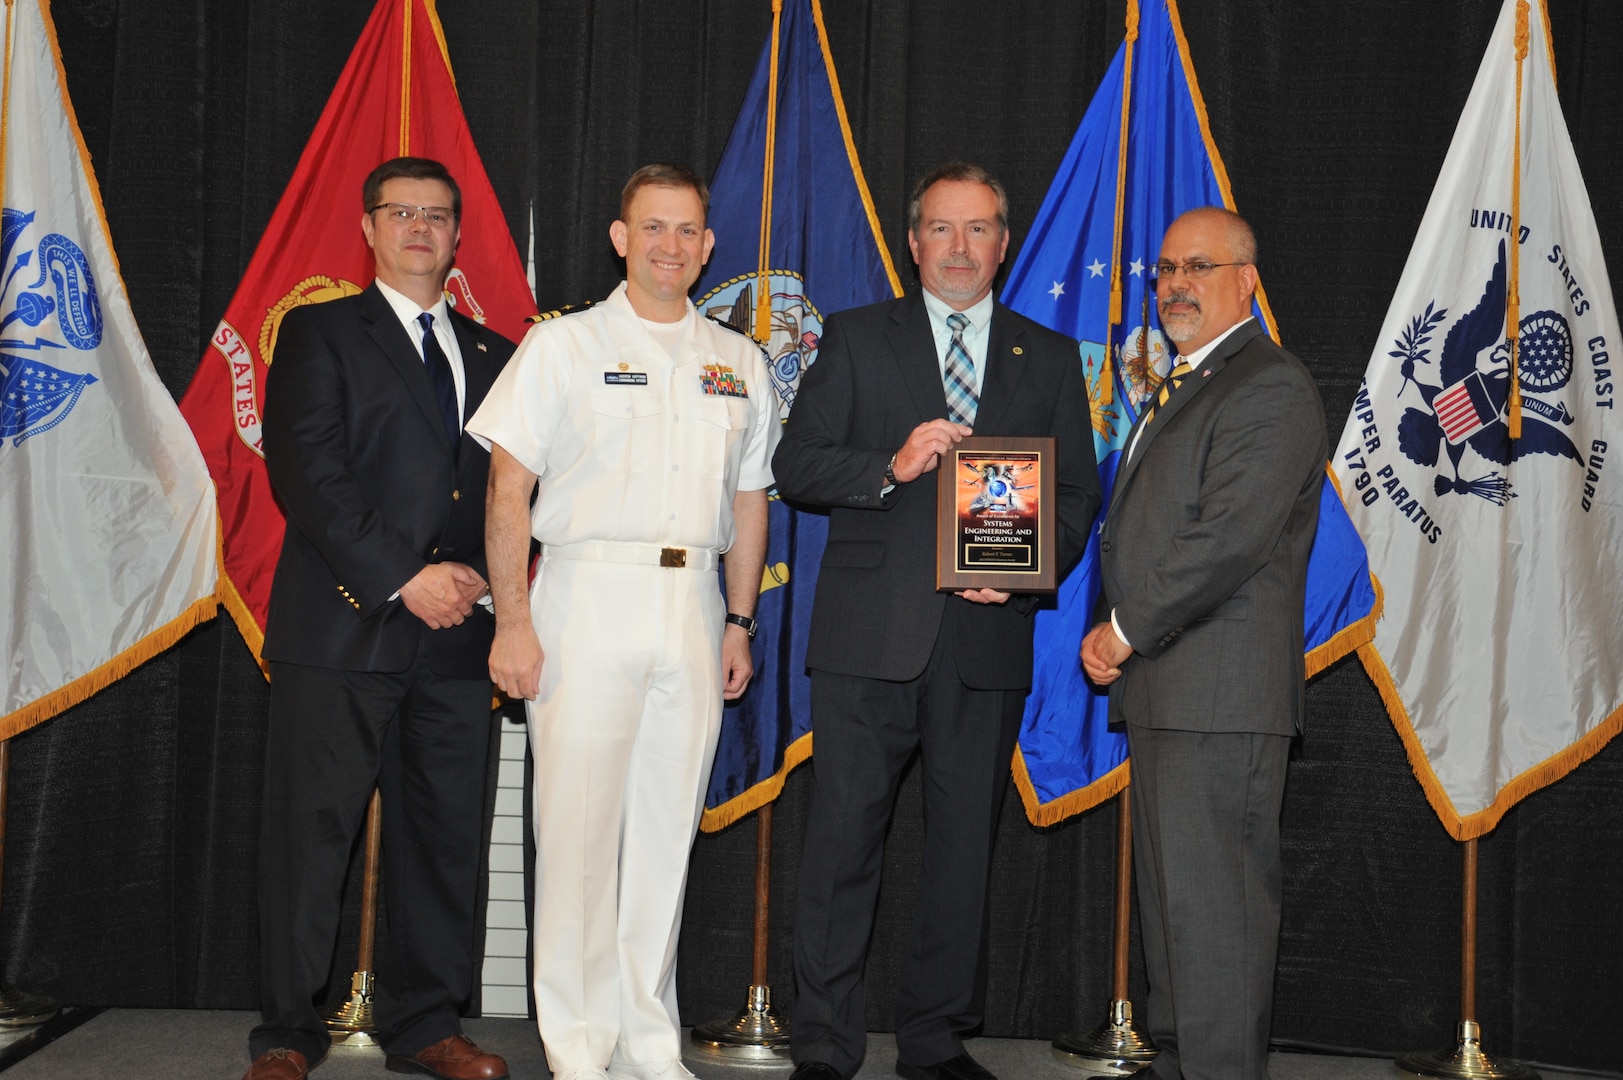 IMAGE: Robert Turner is presented the Award of Excellence for Systems Engineering and Integration at Naval Surface Warfare Center Dahlgren Division's annual awards ceremony, Apr. 26 at the Fredericksburg Expo and Conference Center.

The Award of Excellence for Systems Engineering and Integration was established to recognize individuals who have made a notable and significant impact to NSWCDD through their outstanding performance in systems engineering and integration.